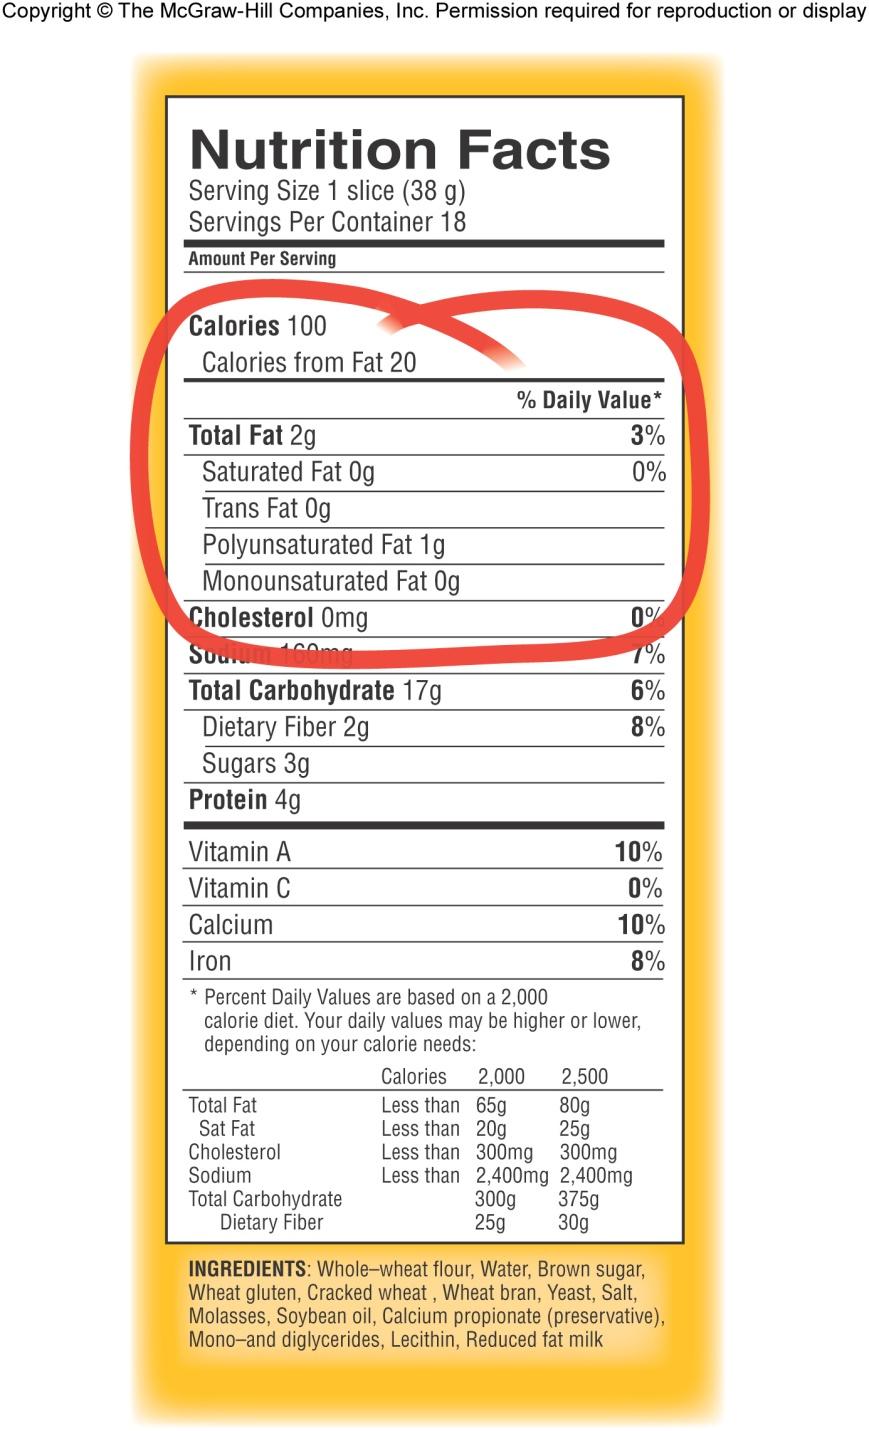 Why Grams of Fat May Not Add Up Label states: Total Fat 2 g Saturated Fat 0 g Trans Fat 0 g Poly. Fat 1 g Mono.